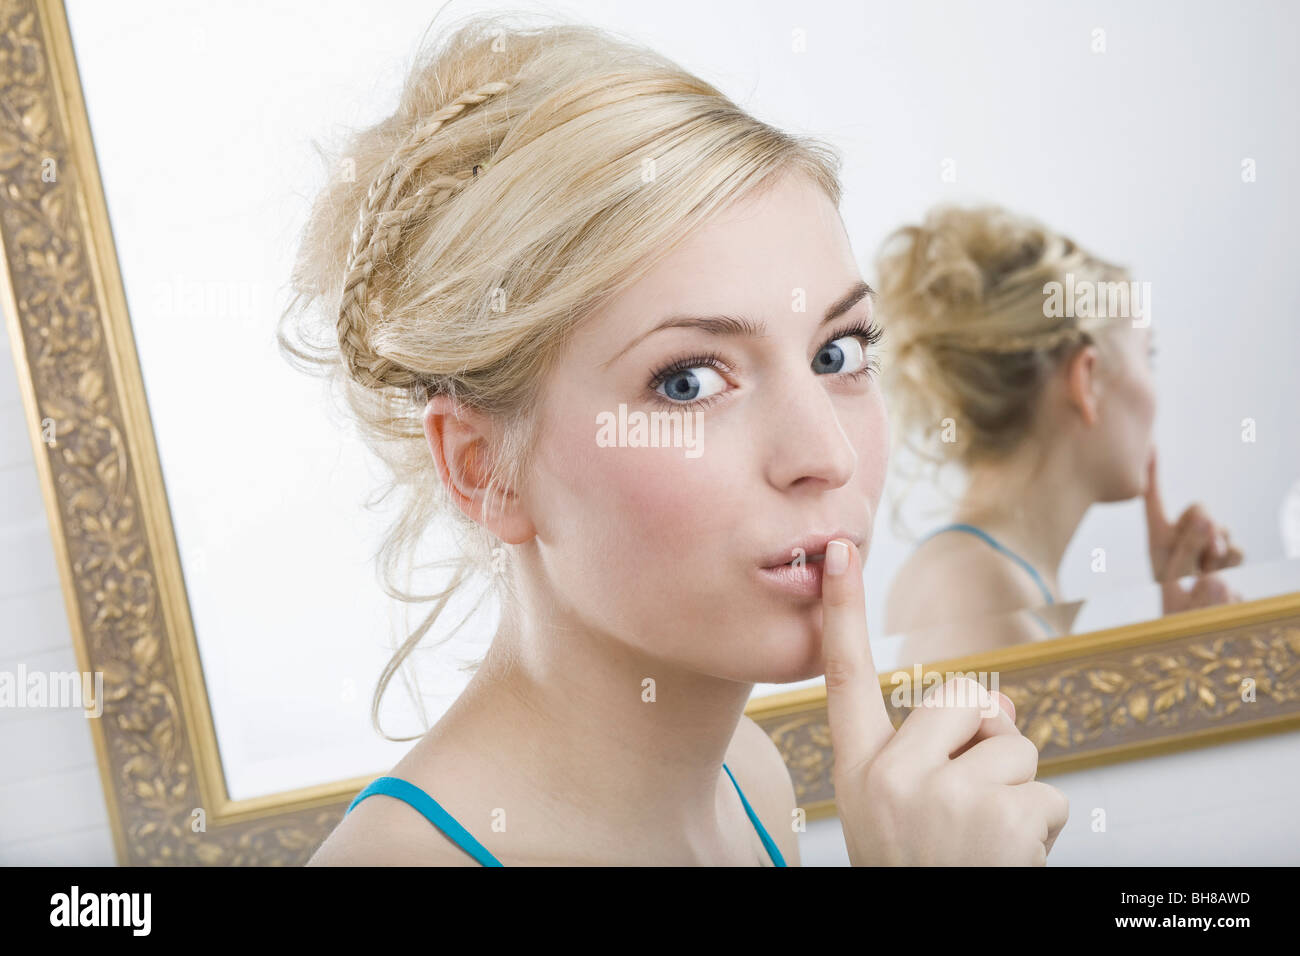 A woman with her finger to her lips in front of a mirror, looking at camera Stock Photo